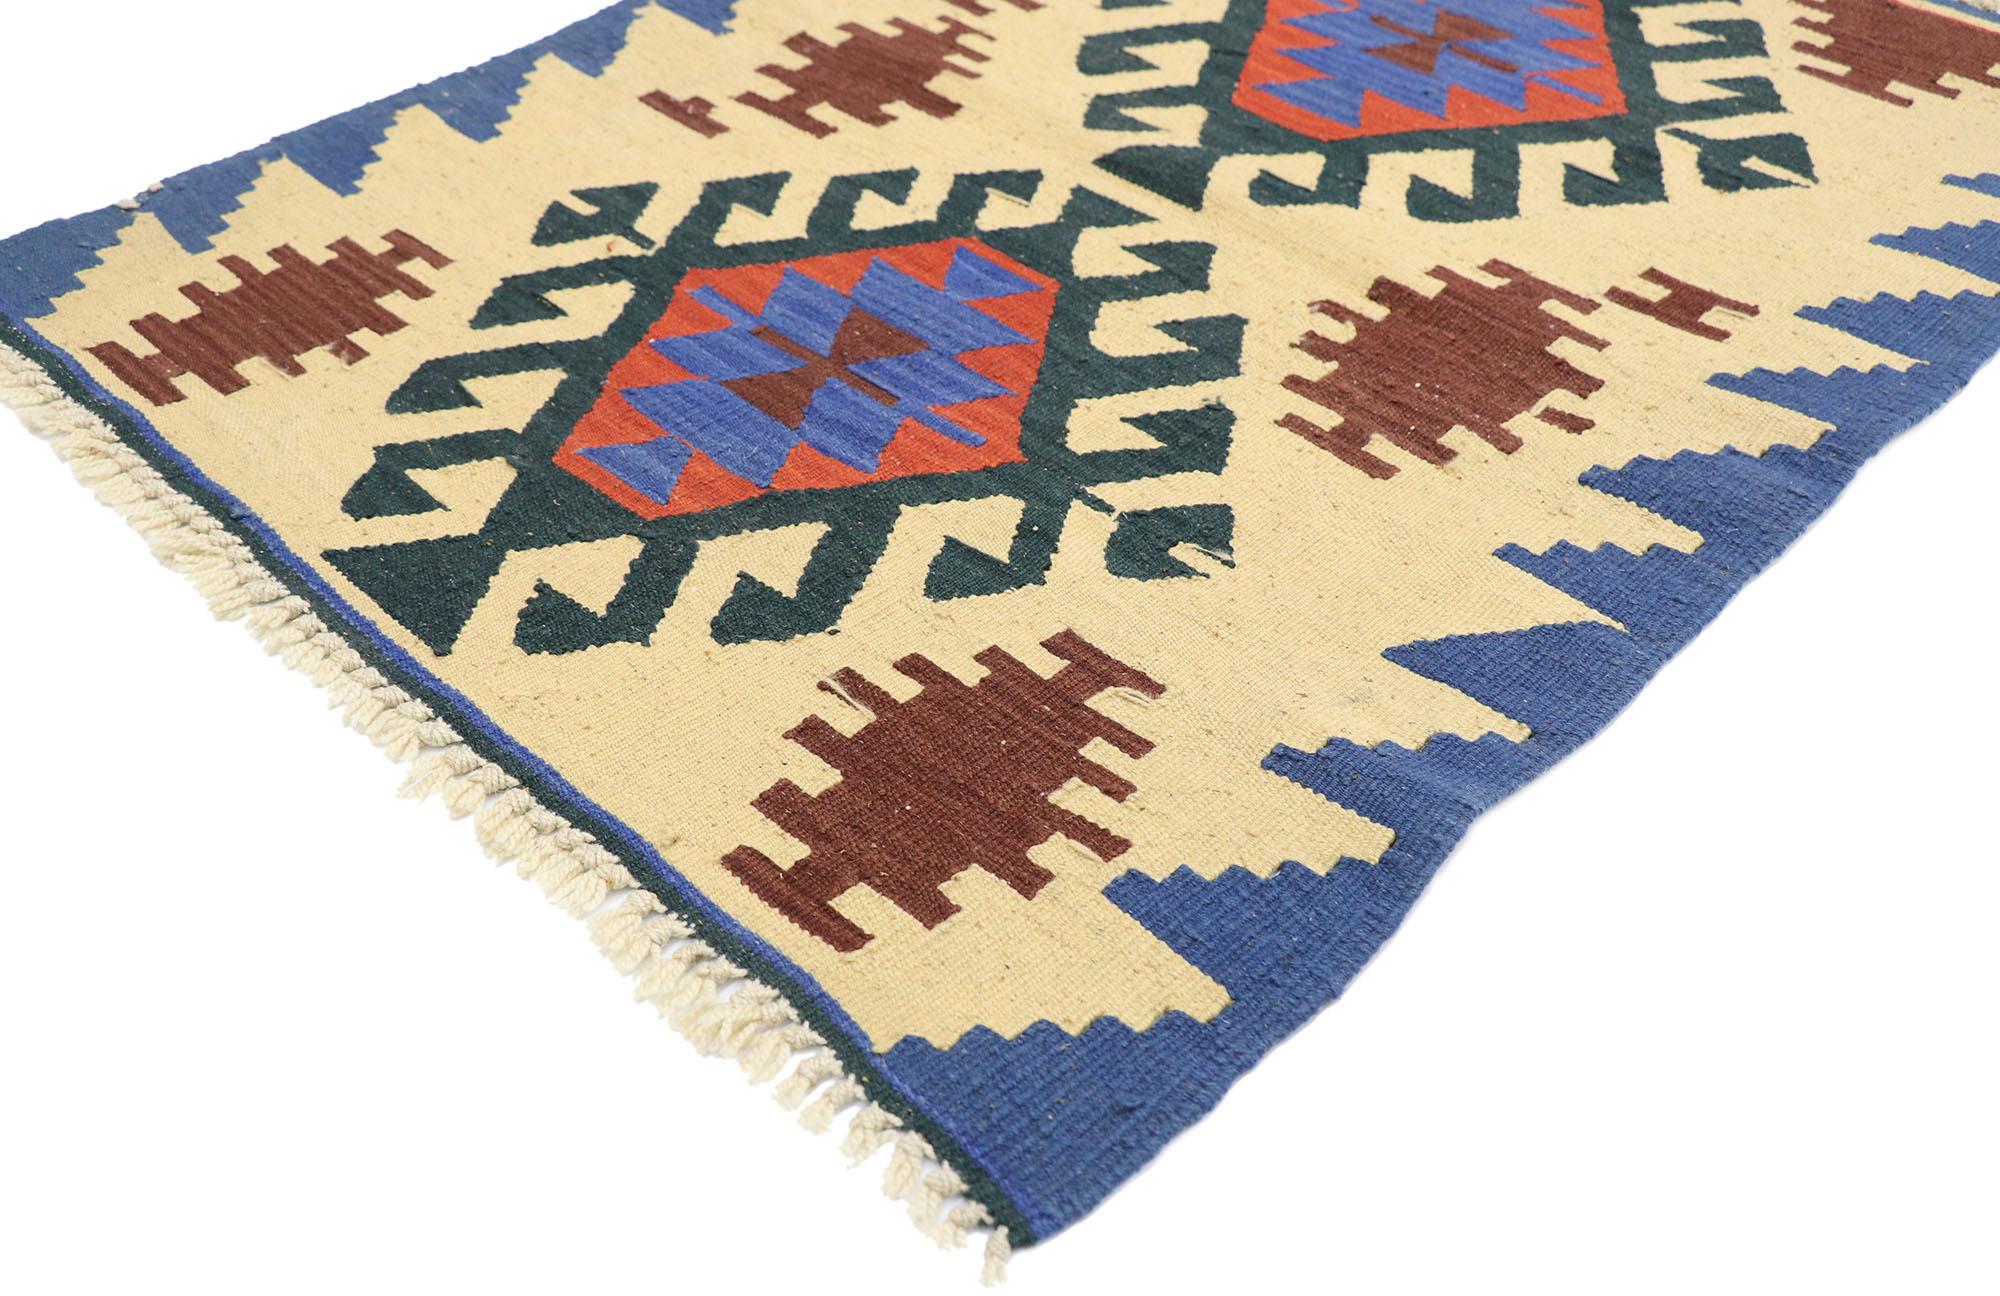 77915, vintage Persian Shiraz Kilim rug with Tribal style. Full of tiny details and a bold expressive design combined with vibrant colors and tribal style, this hand-woven wool vintage Persian Shiraz kilim rug is a captivating vision of woven